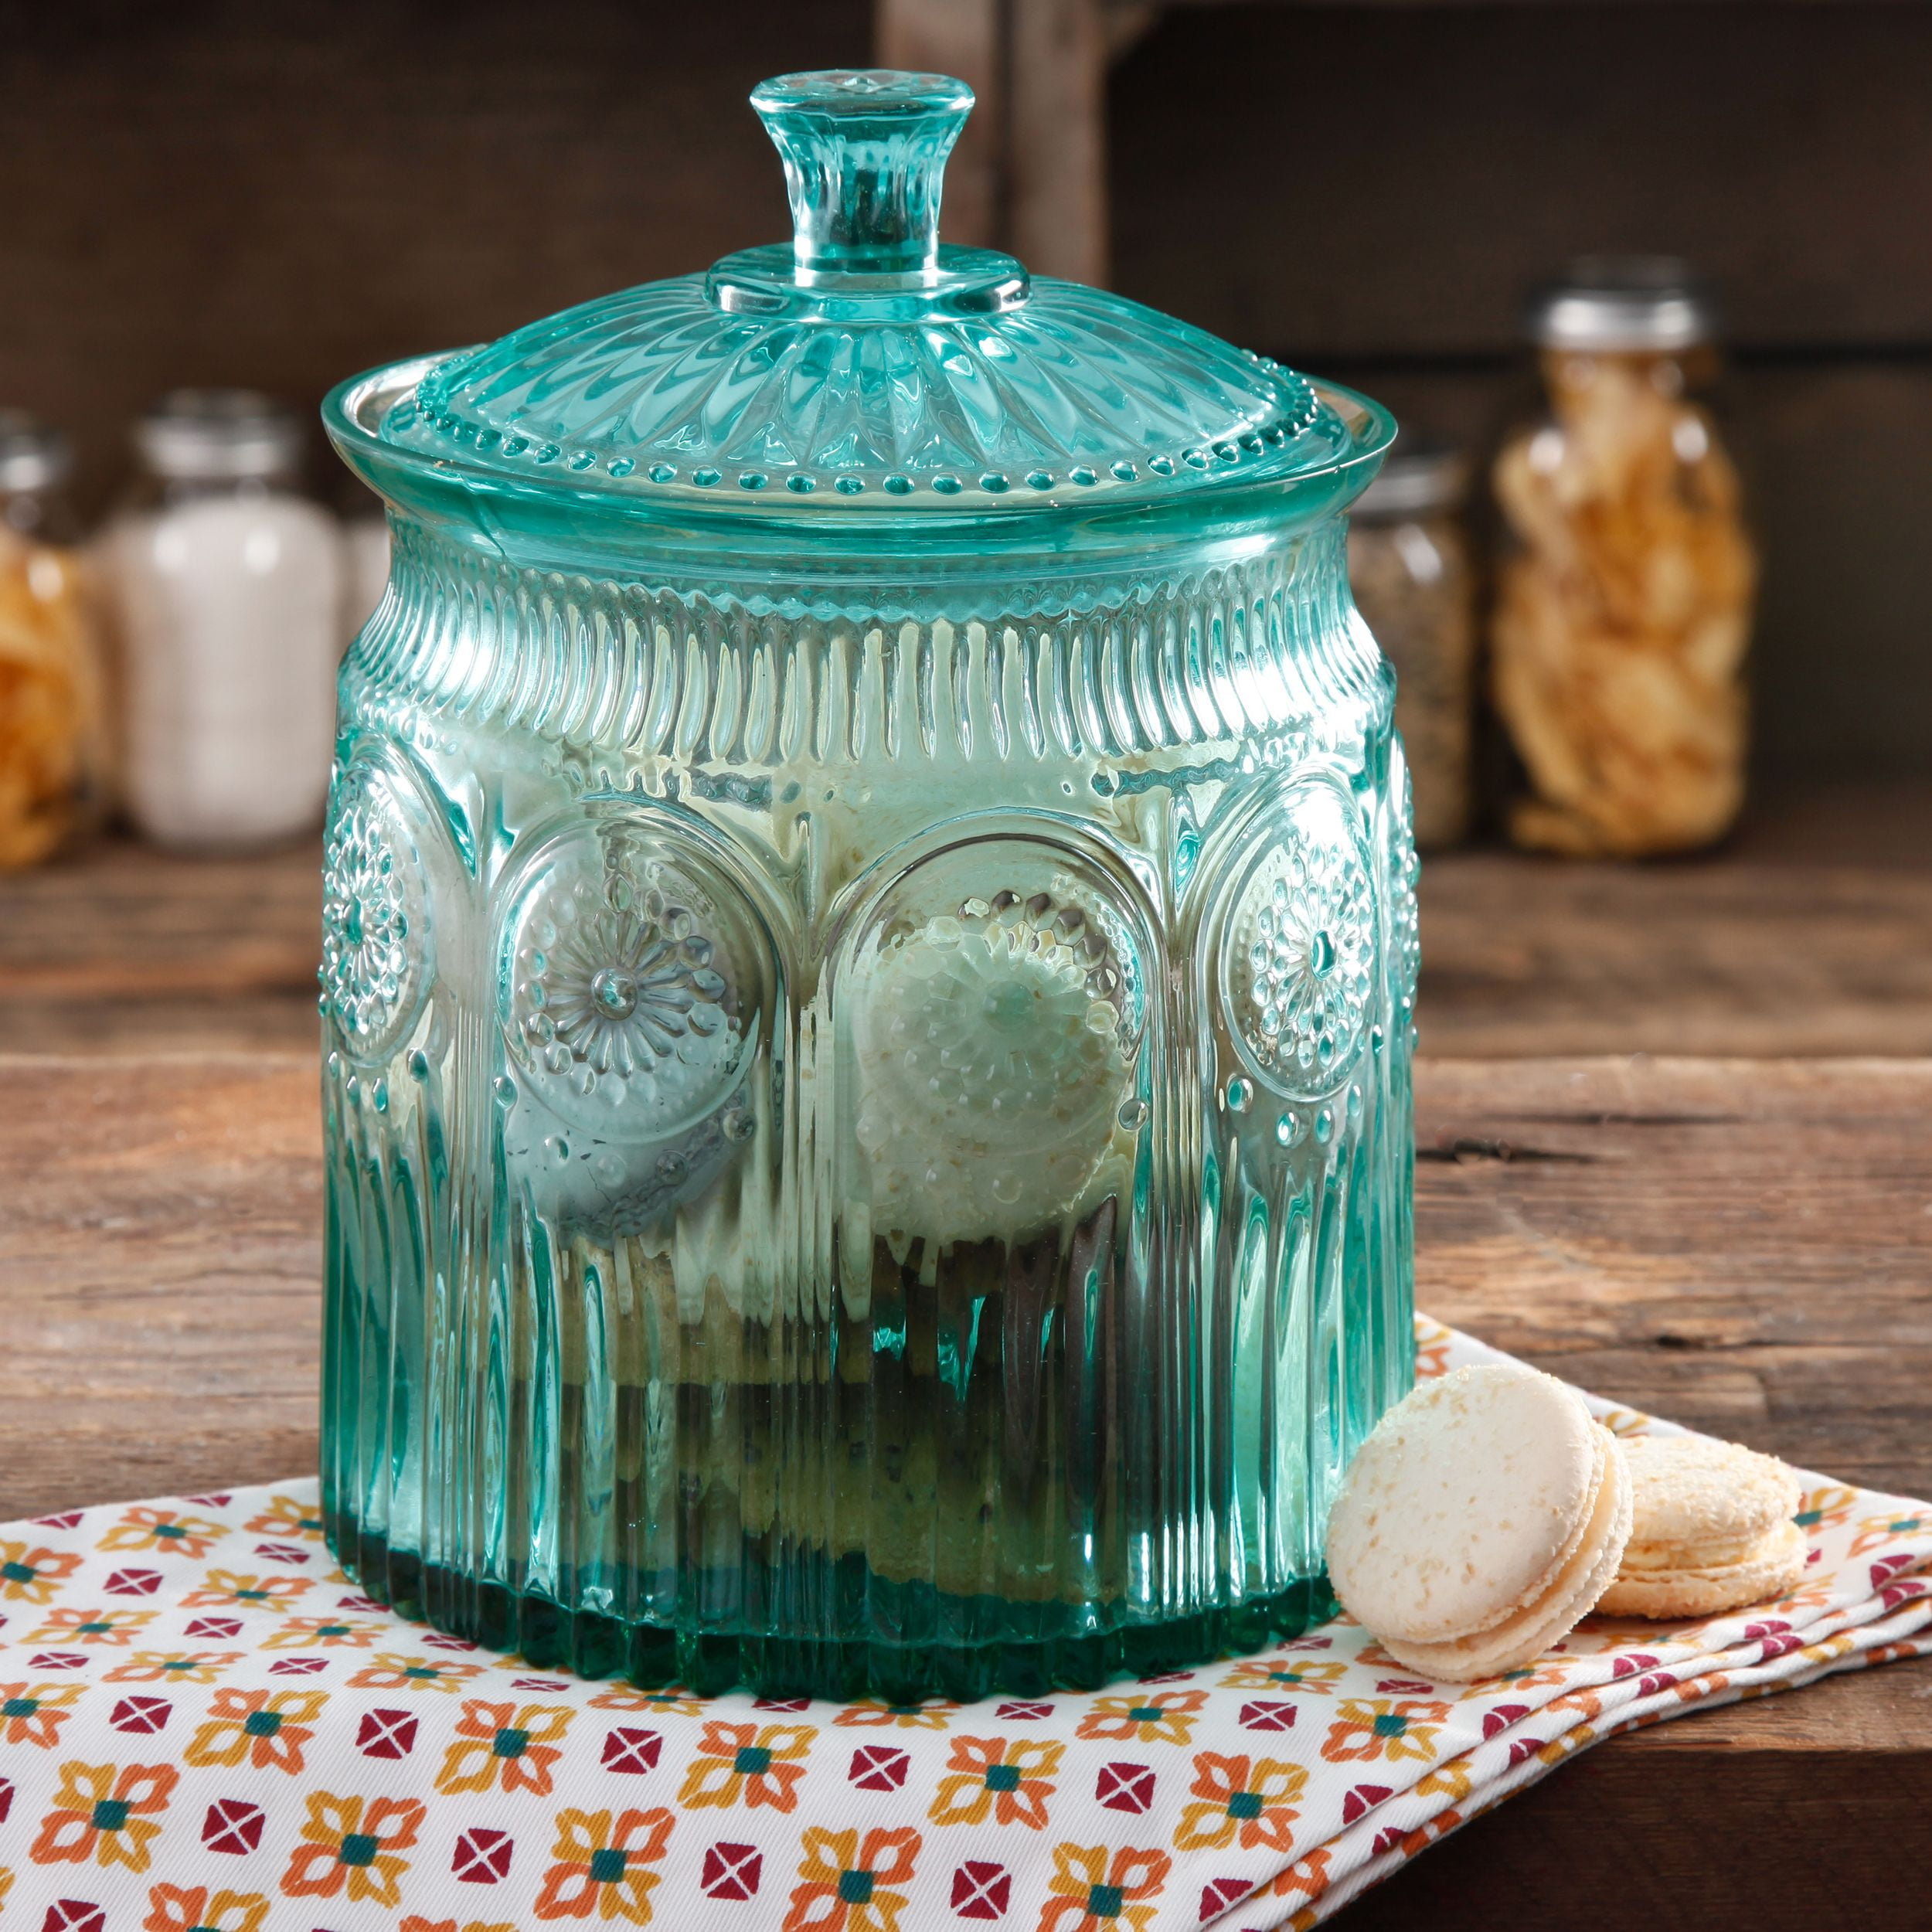 MyGift Turquoise Vintage Ceramic Kitchen Flour Canister / Cookie Jar w/ Abstract Star Design & Bird Topped Lid